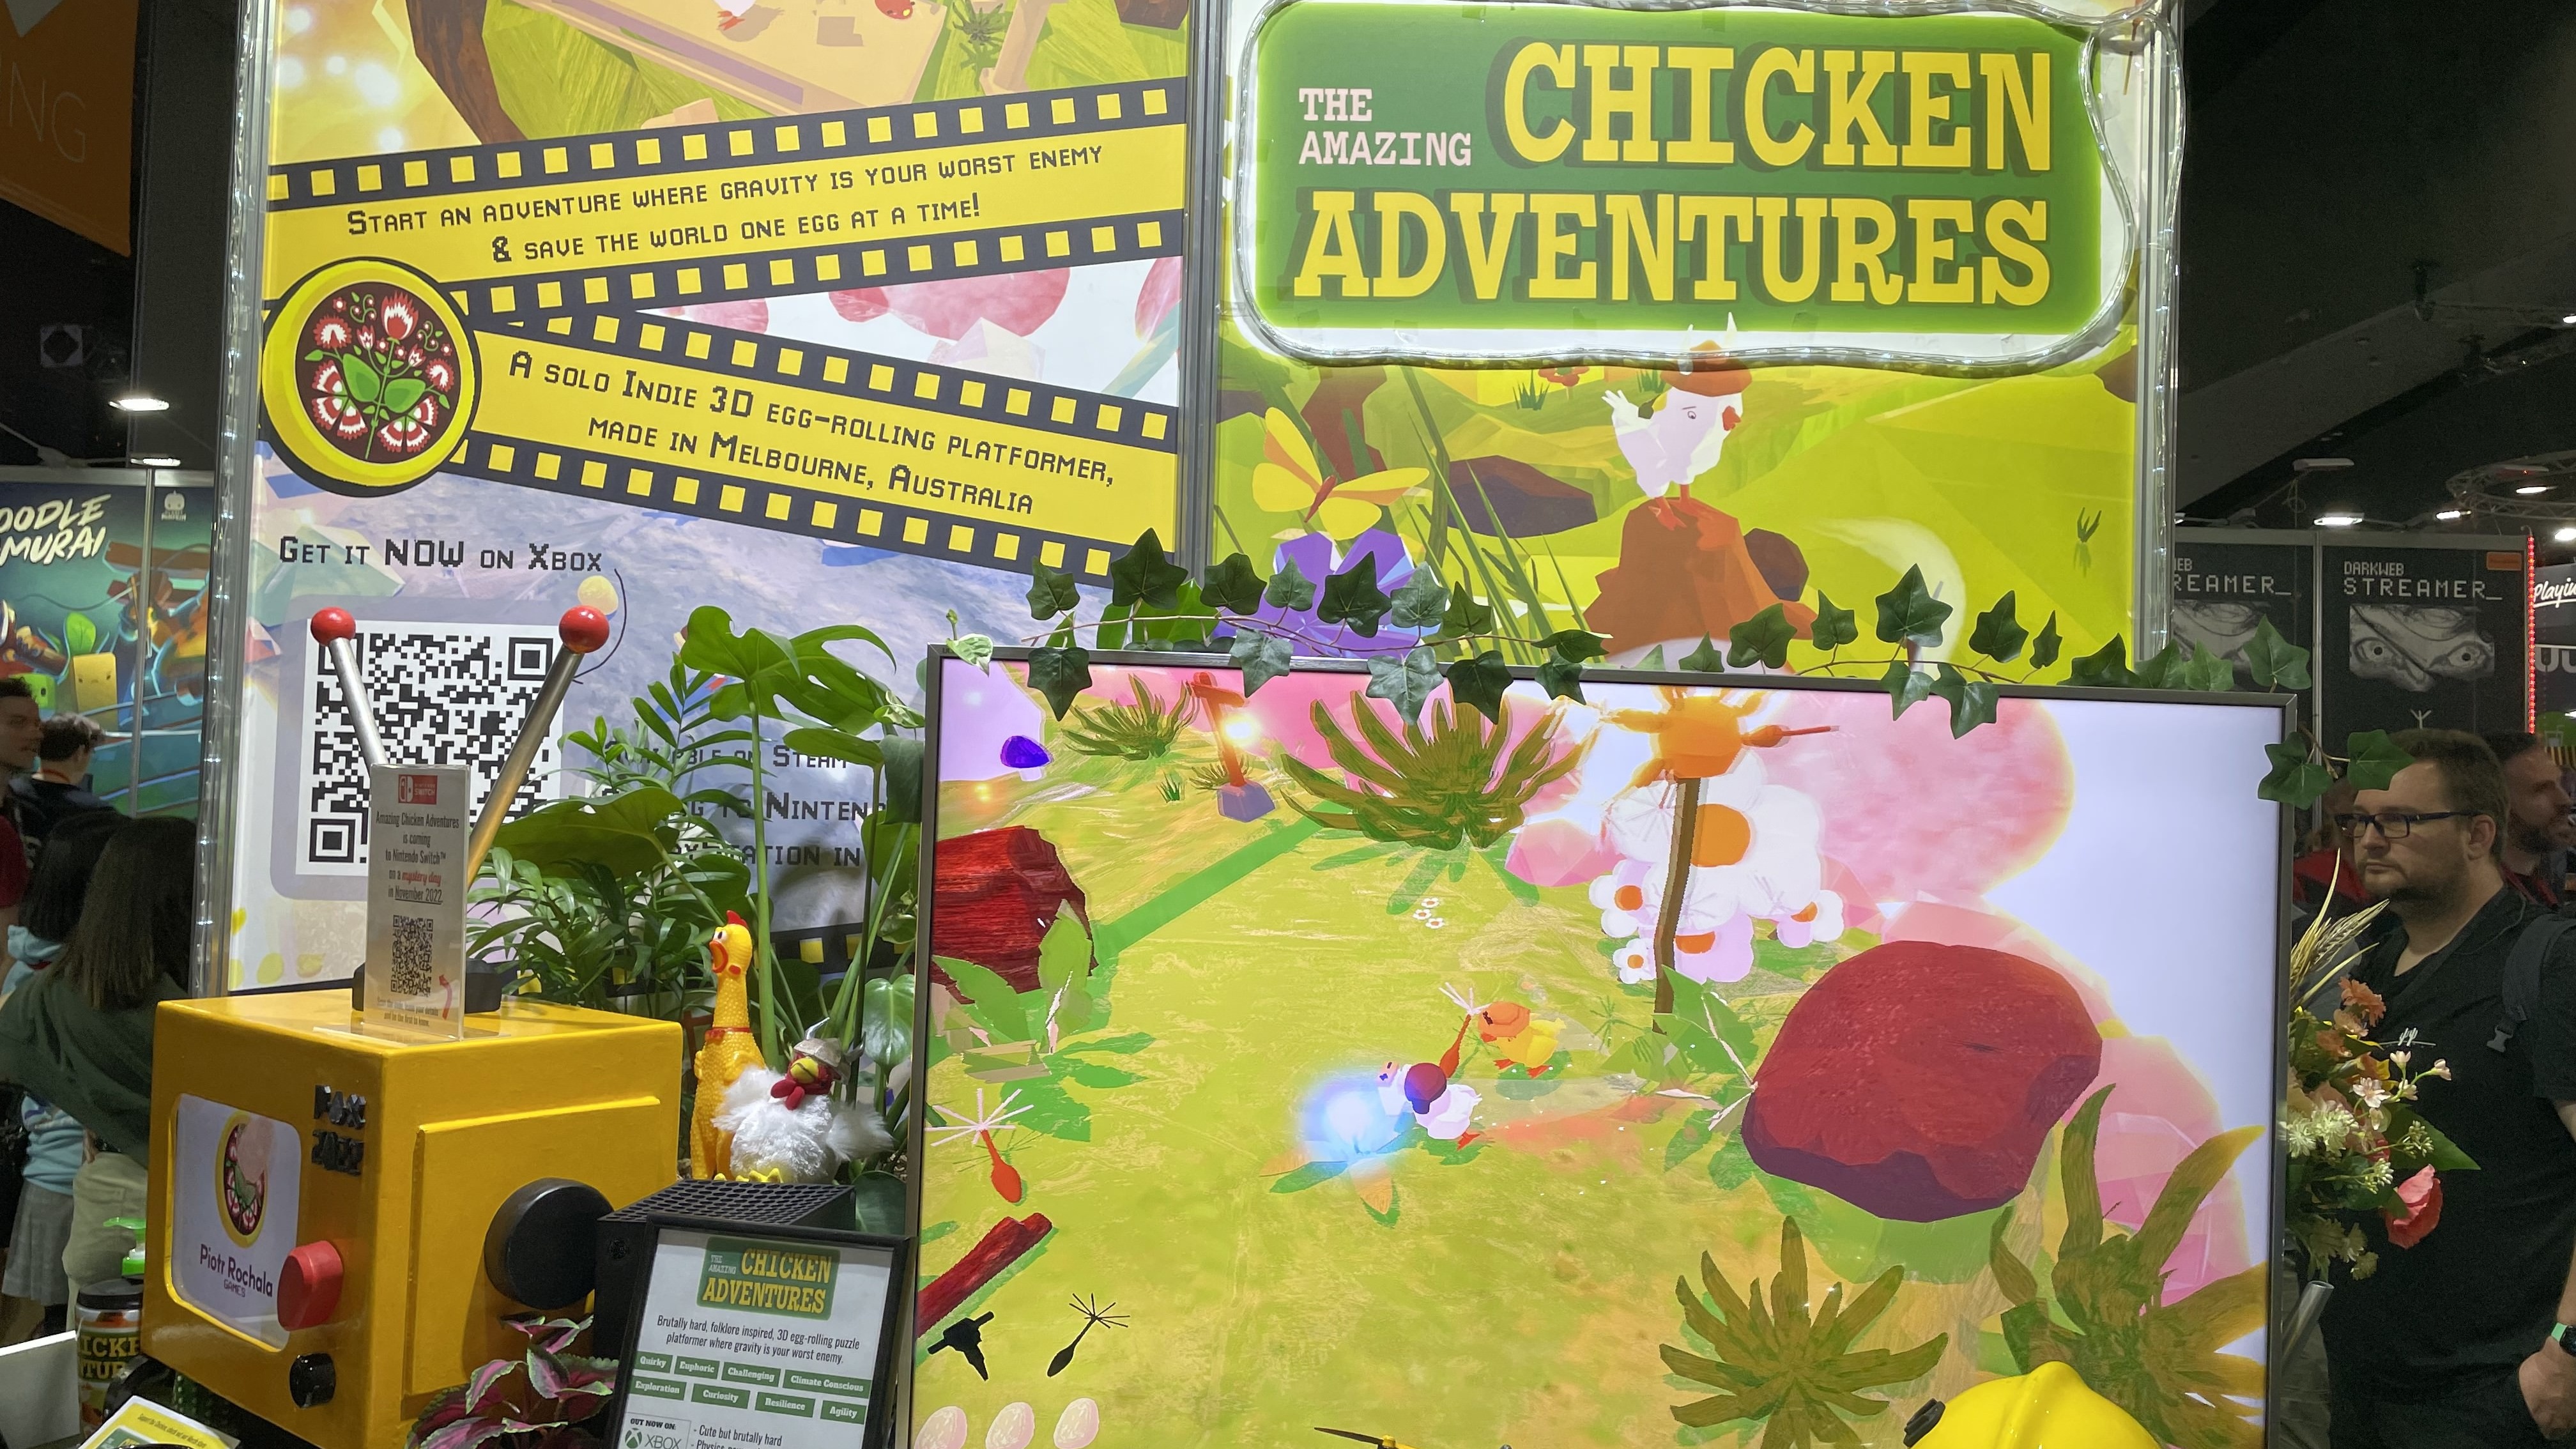 The recently released Amazing Chicken Adventures was on display at PAX Aus 2022.